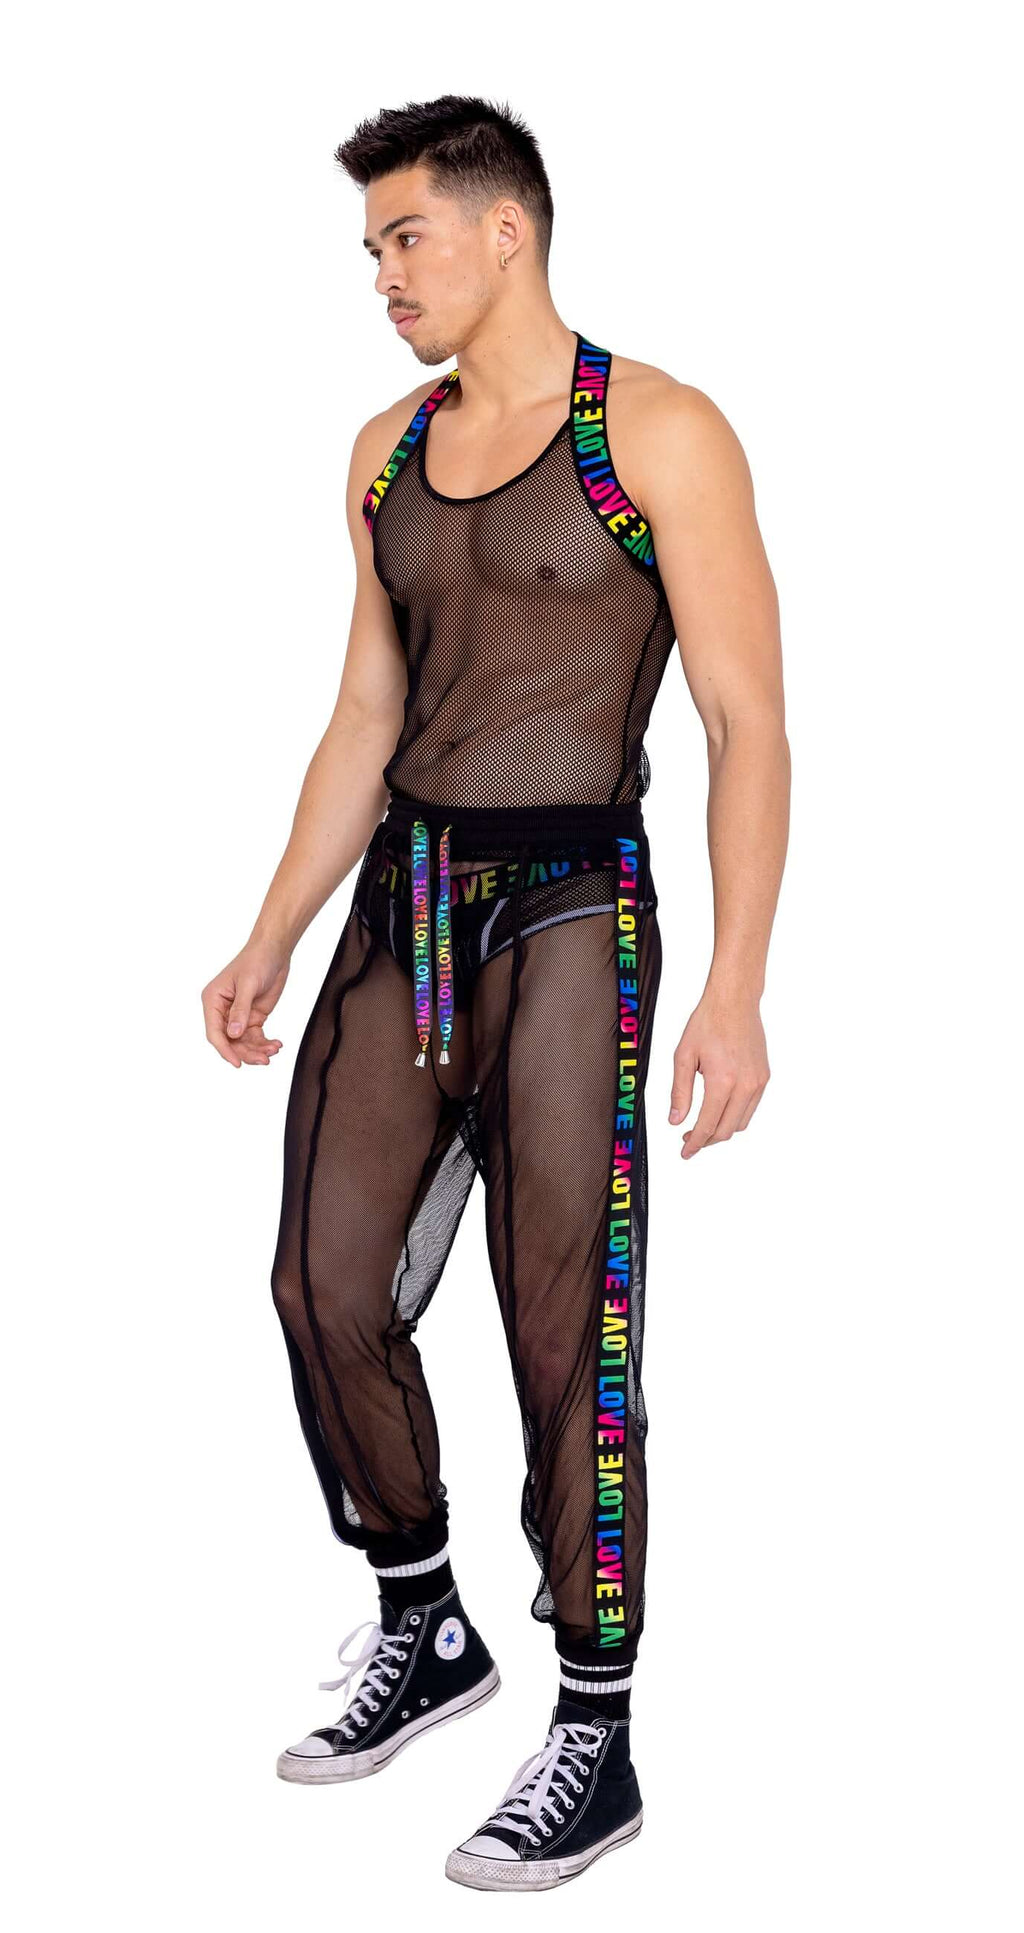 Mens Rave Clothing - Male Rave Outfits, Edc Outfits for Guys